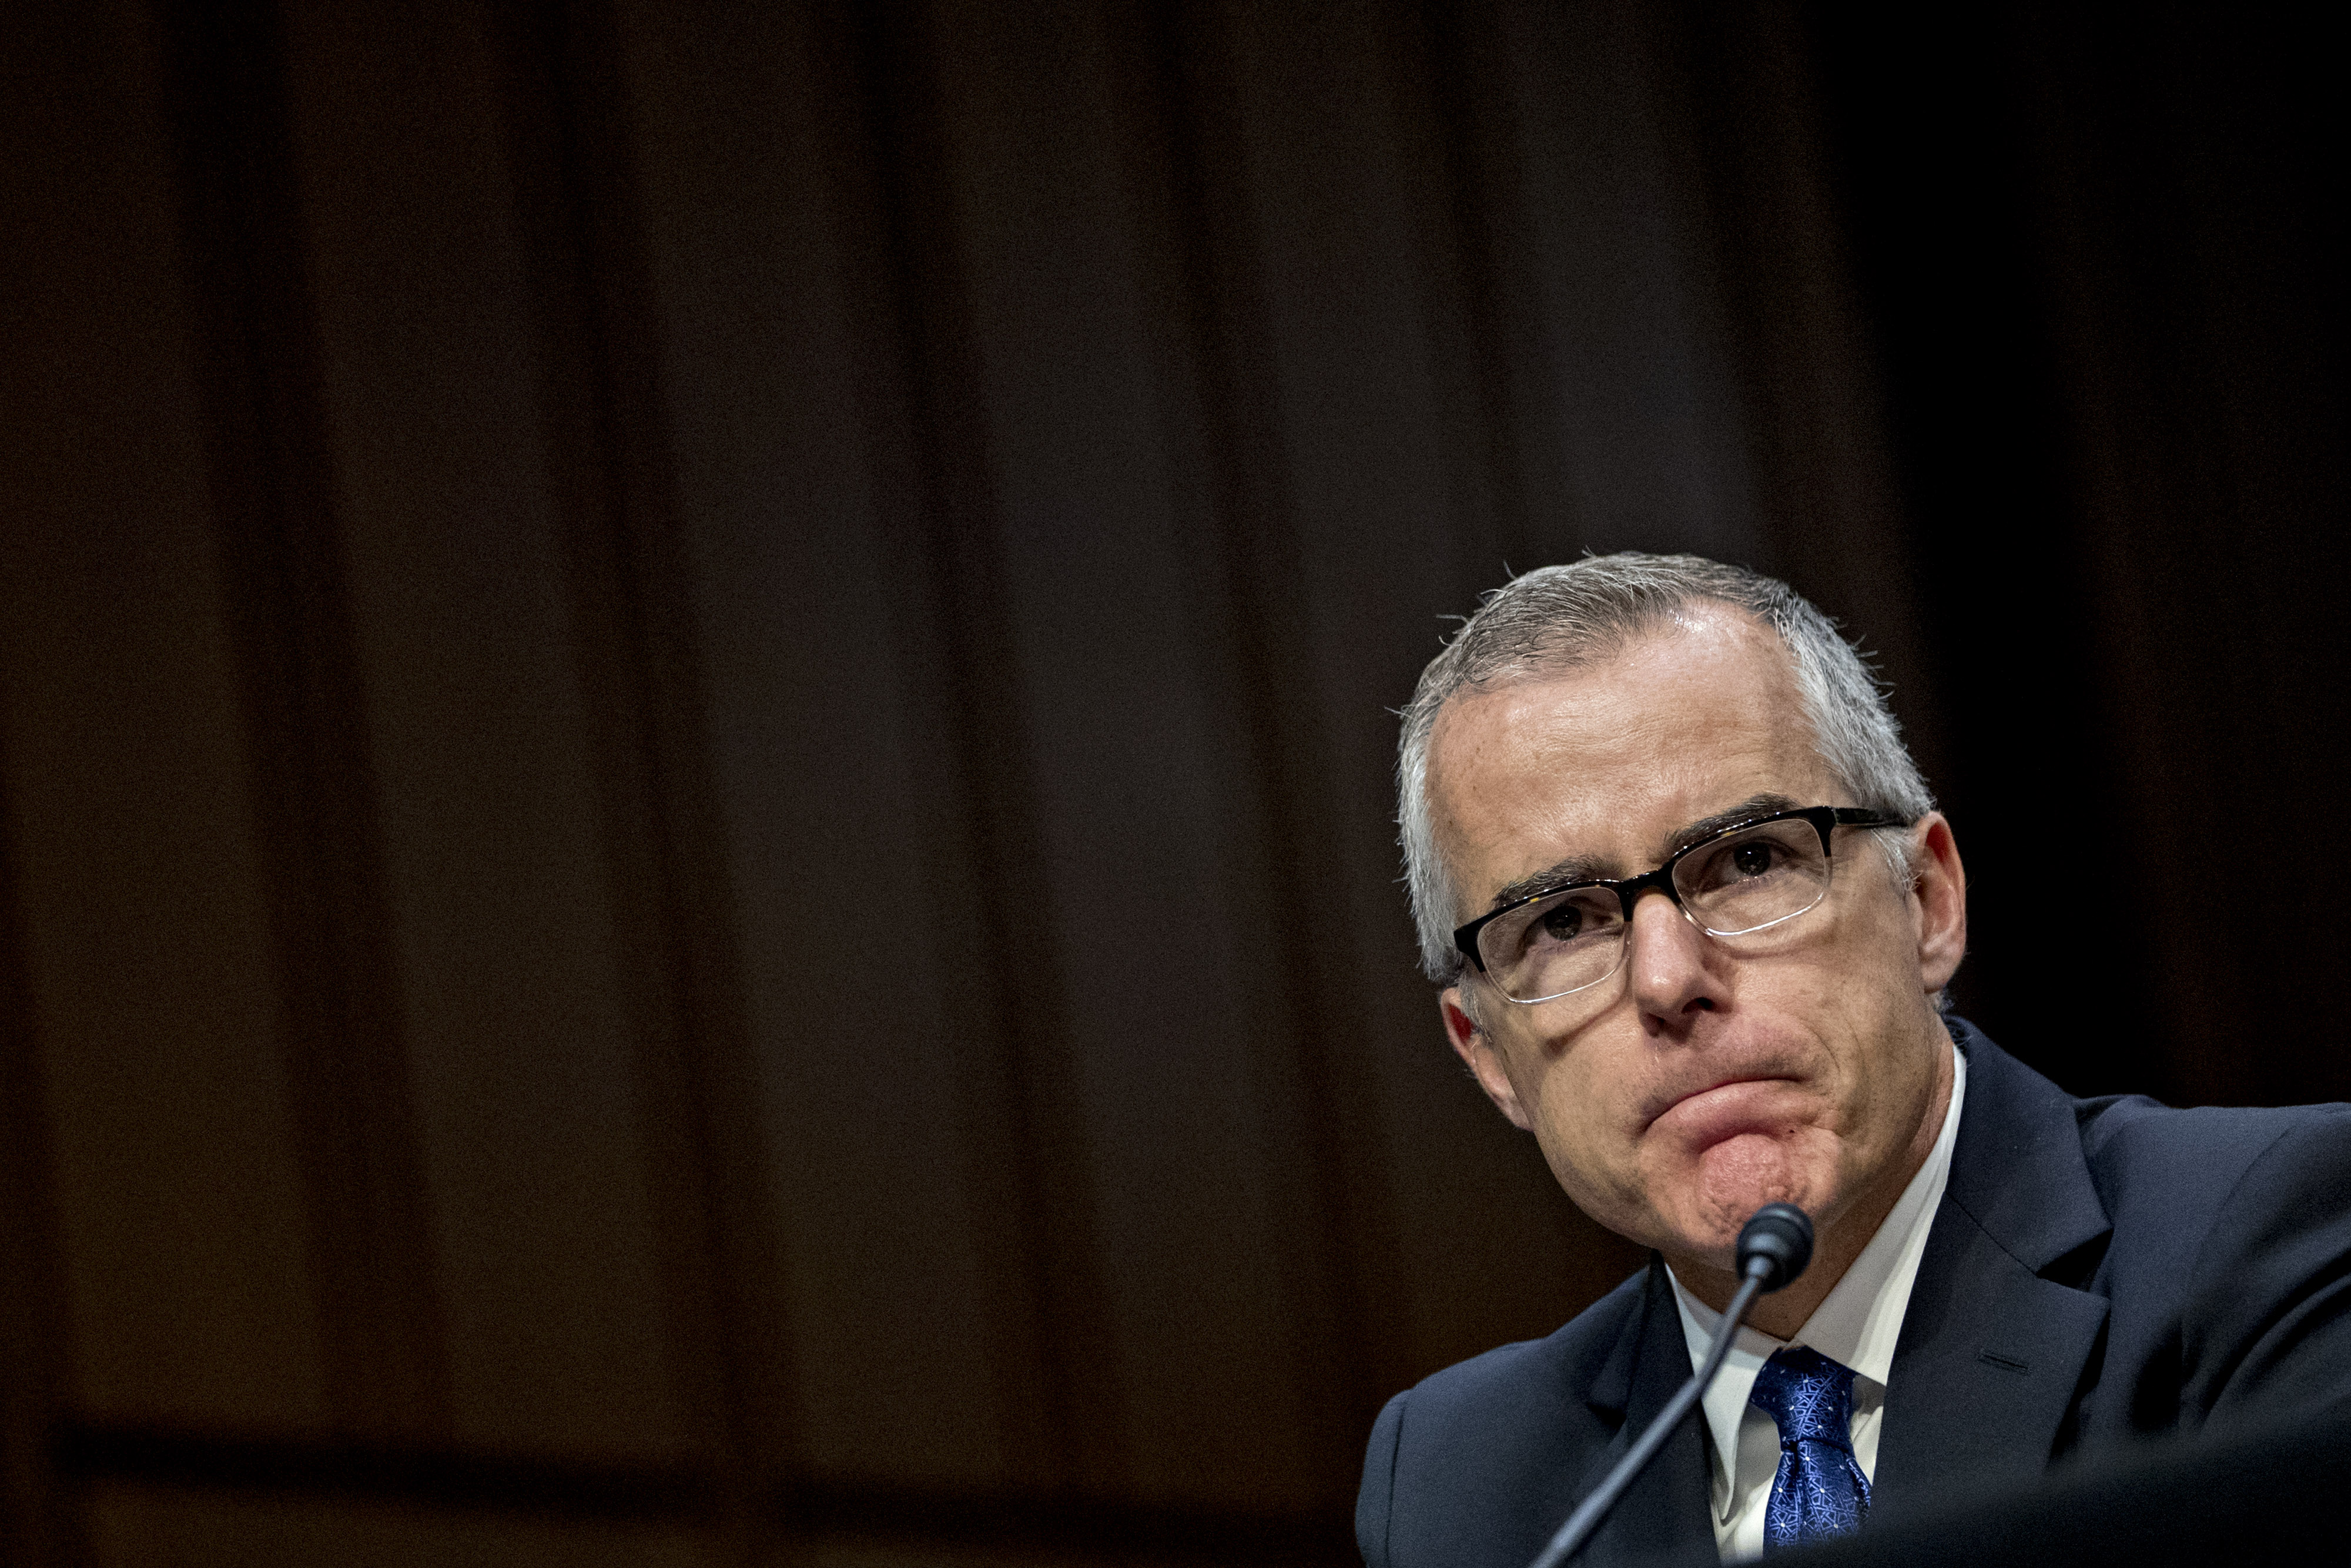 Andrew McCabe, acting director of the FBI, listens during a Senate Intelligence Committee hearing in Washington, D.C. on May 11, 2017. (Andrew Harrer—Bloomberg/Getty Images)